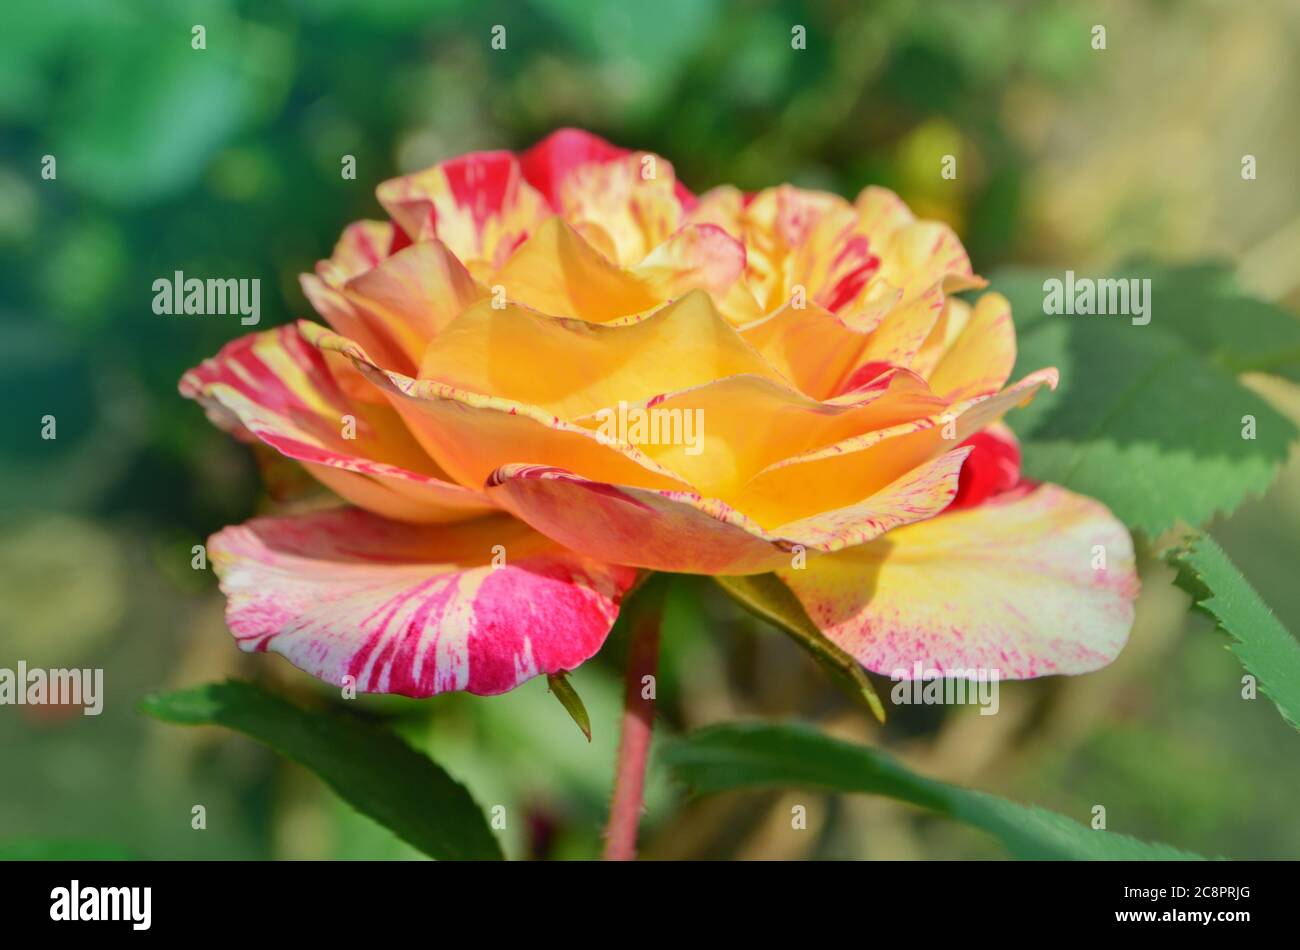 Striped yellow and red hybrid tea rose Claude Monet. Claude Monet roses Stock Photo